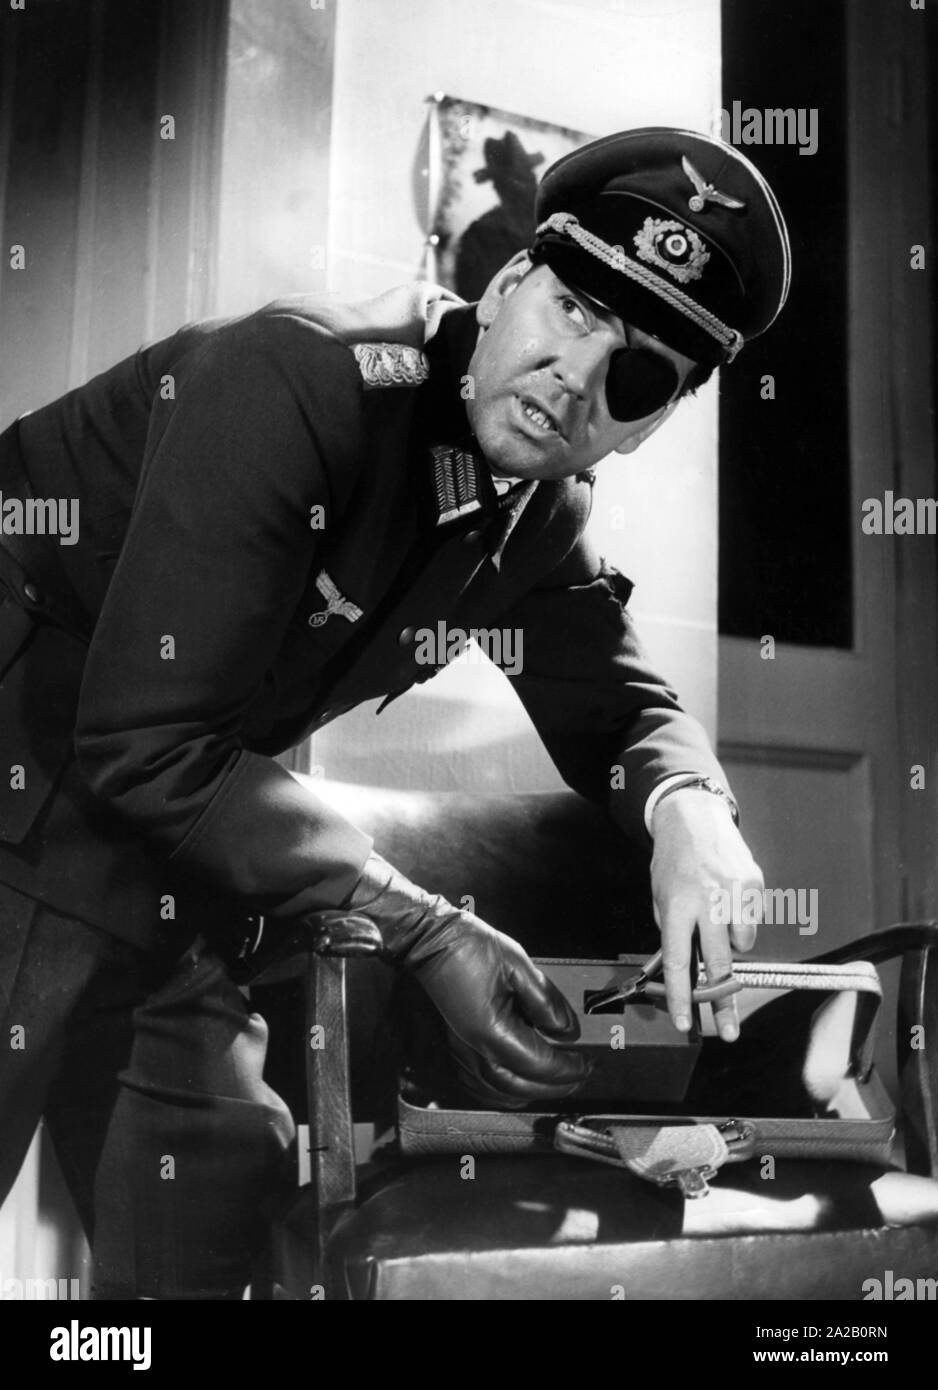 Scene from the film 'It Happened on July 20th' by Georg Wilhelm Pabst, the film was premiered on 19 June 1955. Claus Schenk Graf von Stauffenberg was impersonated by Bernhard Wicki. Stock Photo